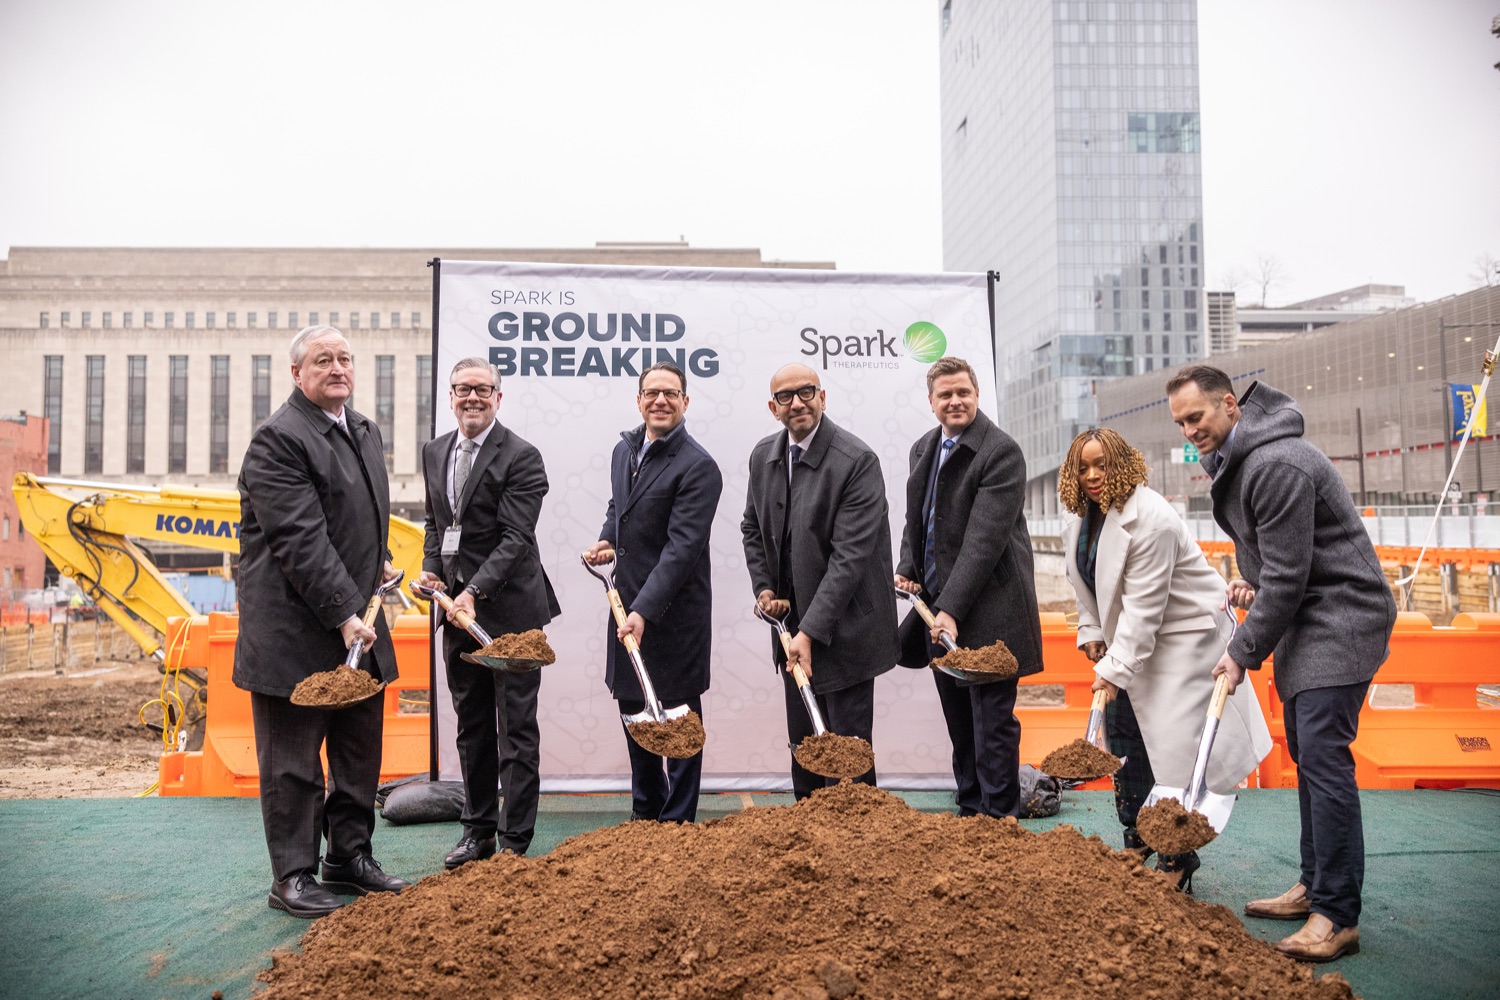 Pennsylvania Governor Josh Shapiro participates in a groundbreaking for Spark Therapeutics at the future site of their new building, at 30th and Chestnut streets.  FEBRUARY 28, 2023 - PHILADELPHIA, PA<br><a href="https://filesource.amperwave.net/commonwealthofpa/photo/22728_gov_spark_dz_0014.JPG" target="_blank">⇣ Download Photo</a>